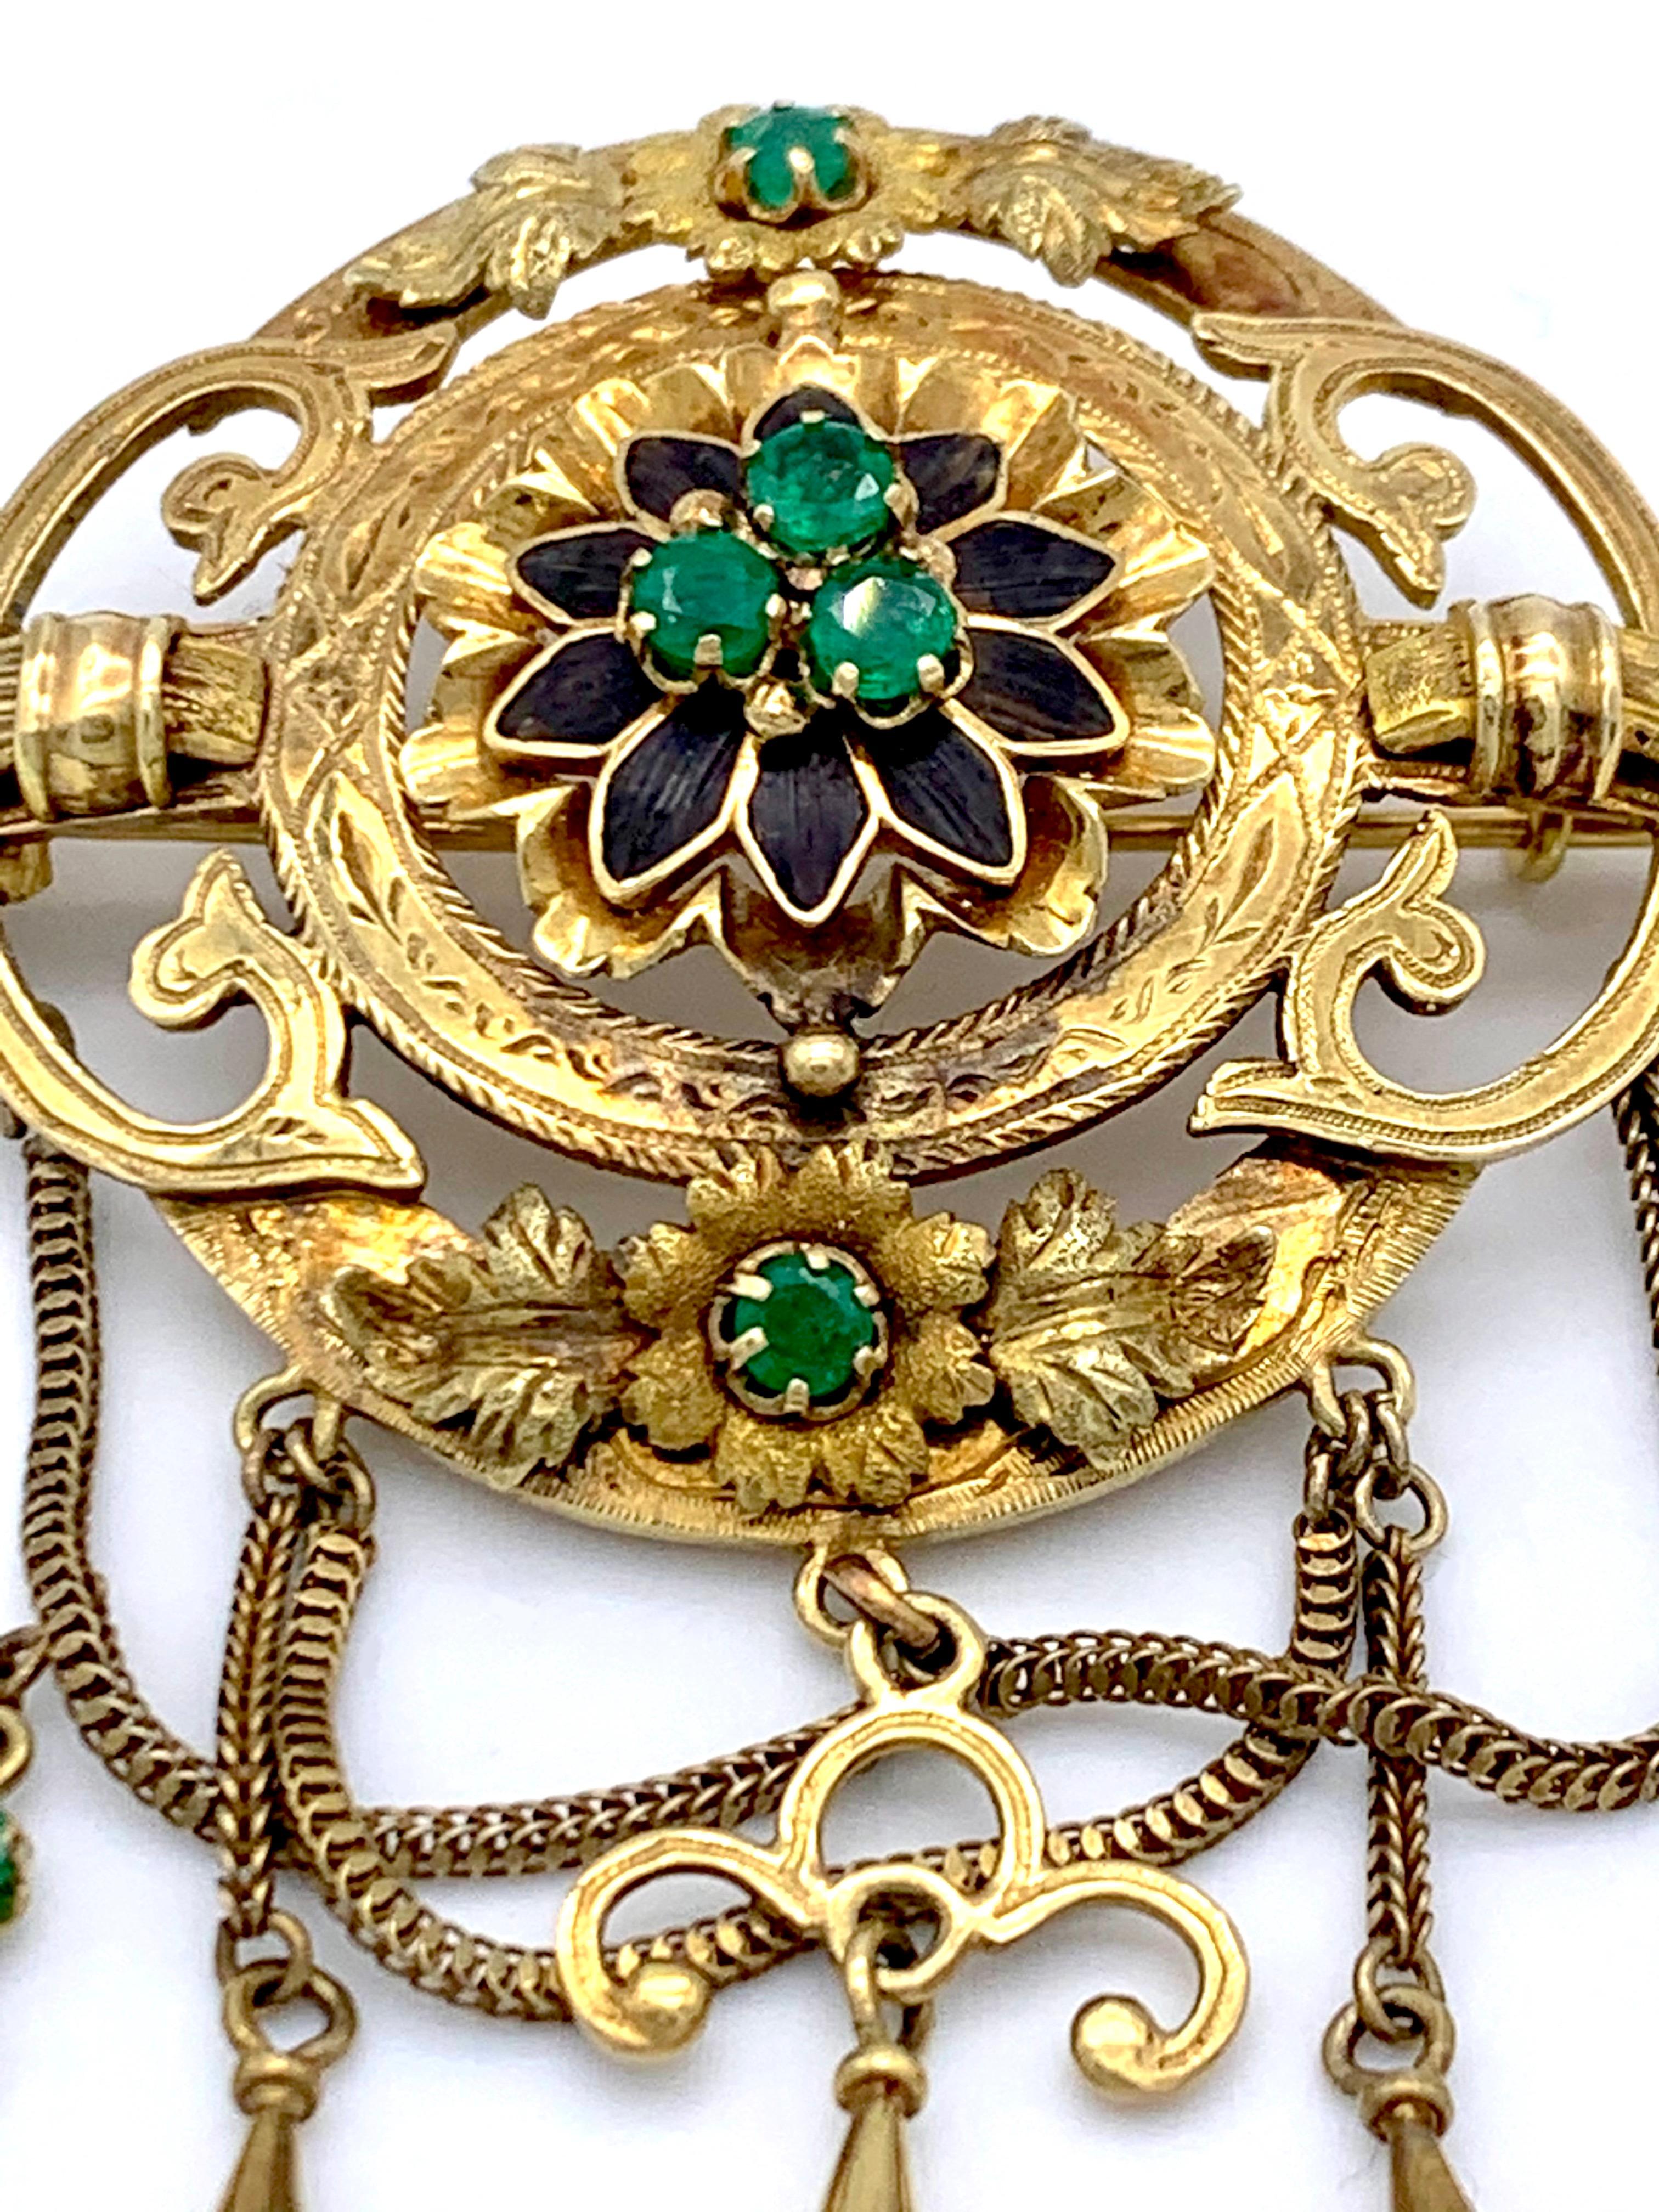 This wonderful and highly decorative brooch in the gothic revial taste has been crafted in Italy around 1865 ca. This striking piece of jewellery can also be worn as a pendant by piercing it's pin through the links of a gold chain. The centre of the